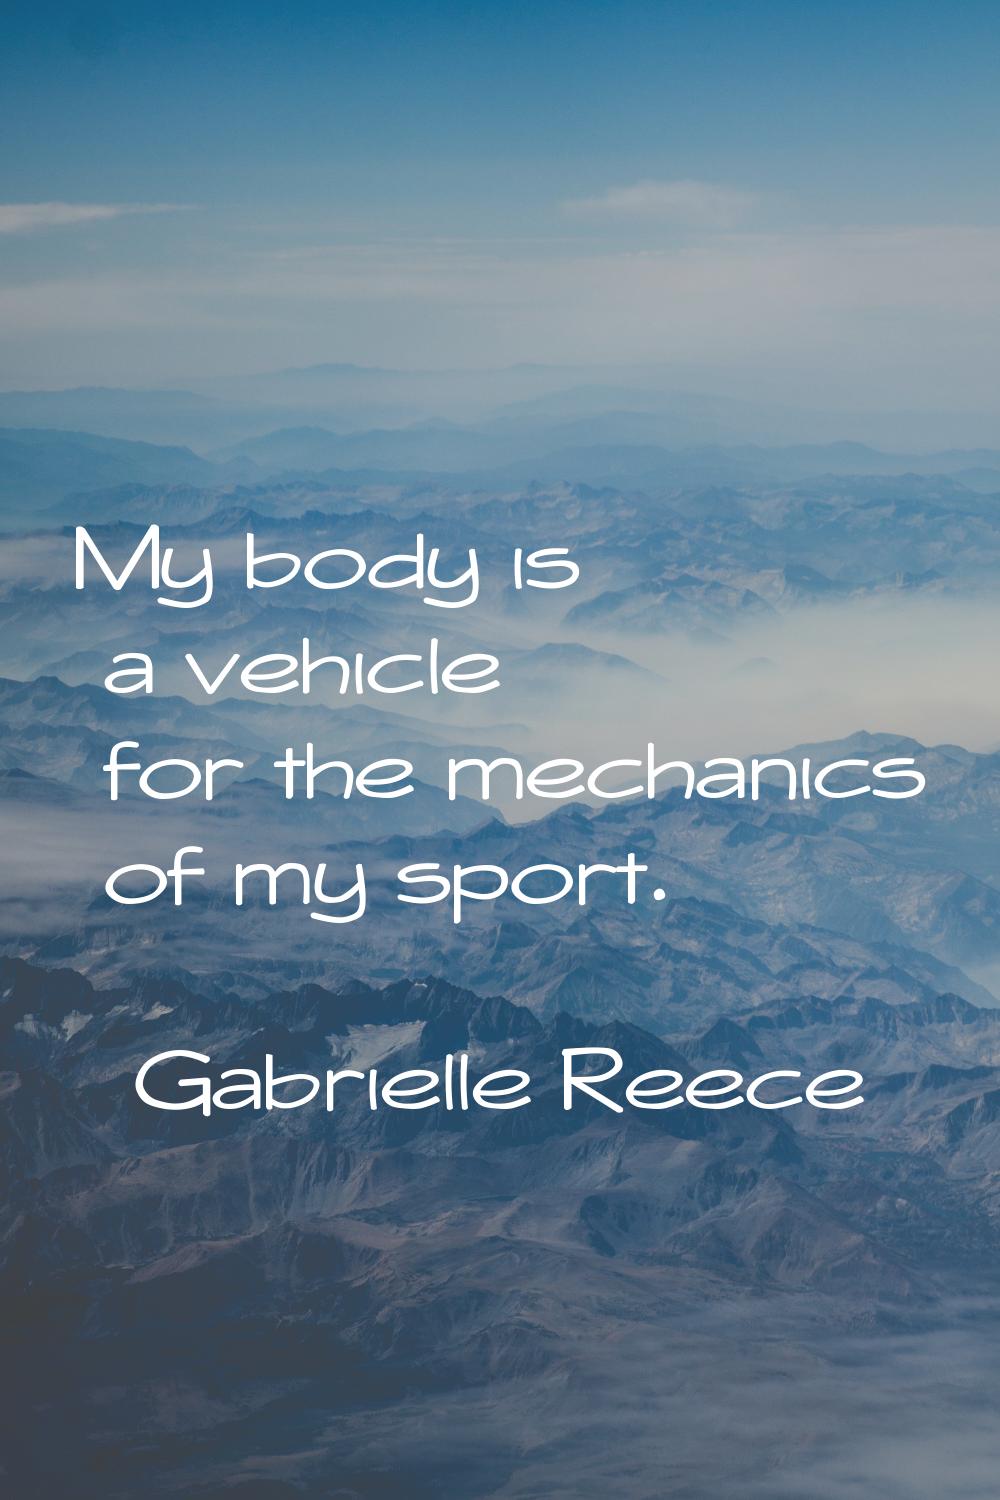 My body is a vehicle for the mechanics of my sport.